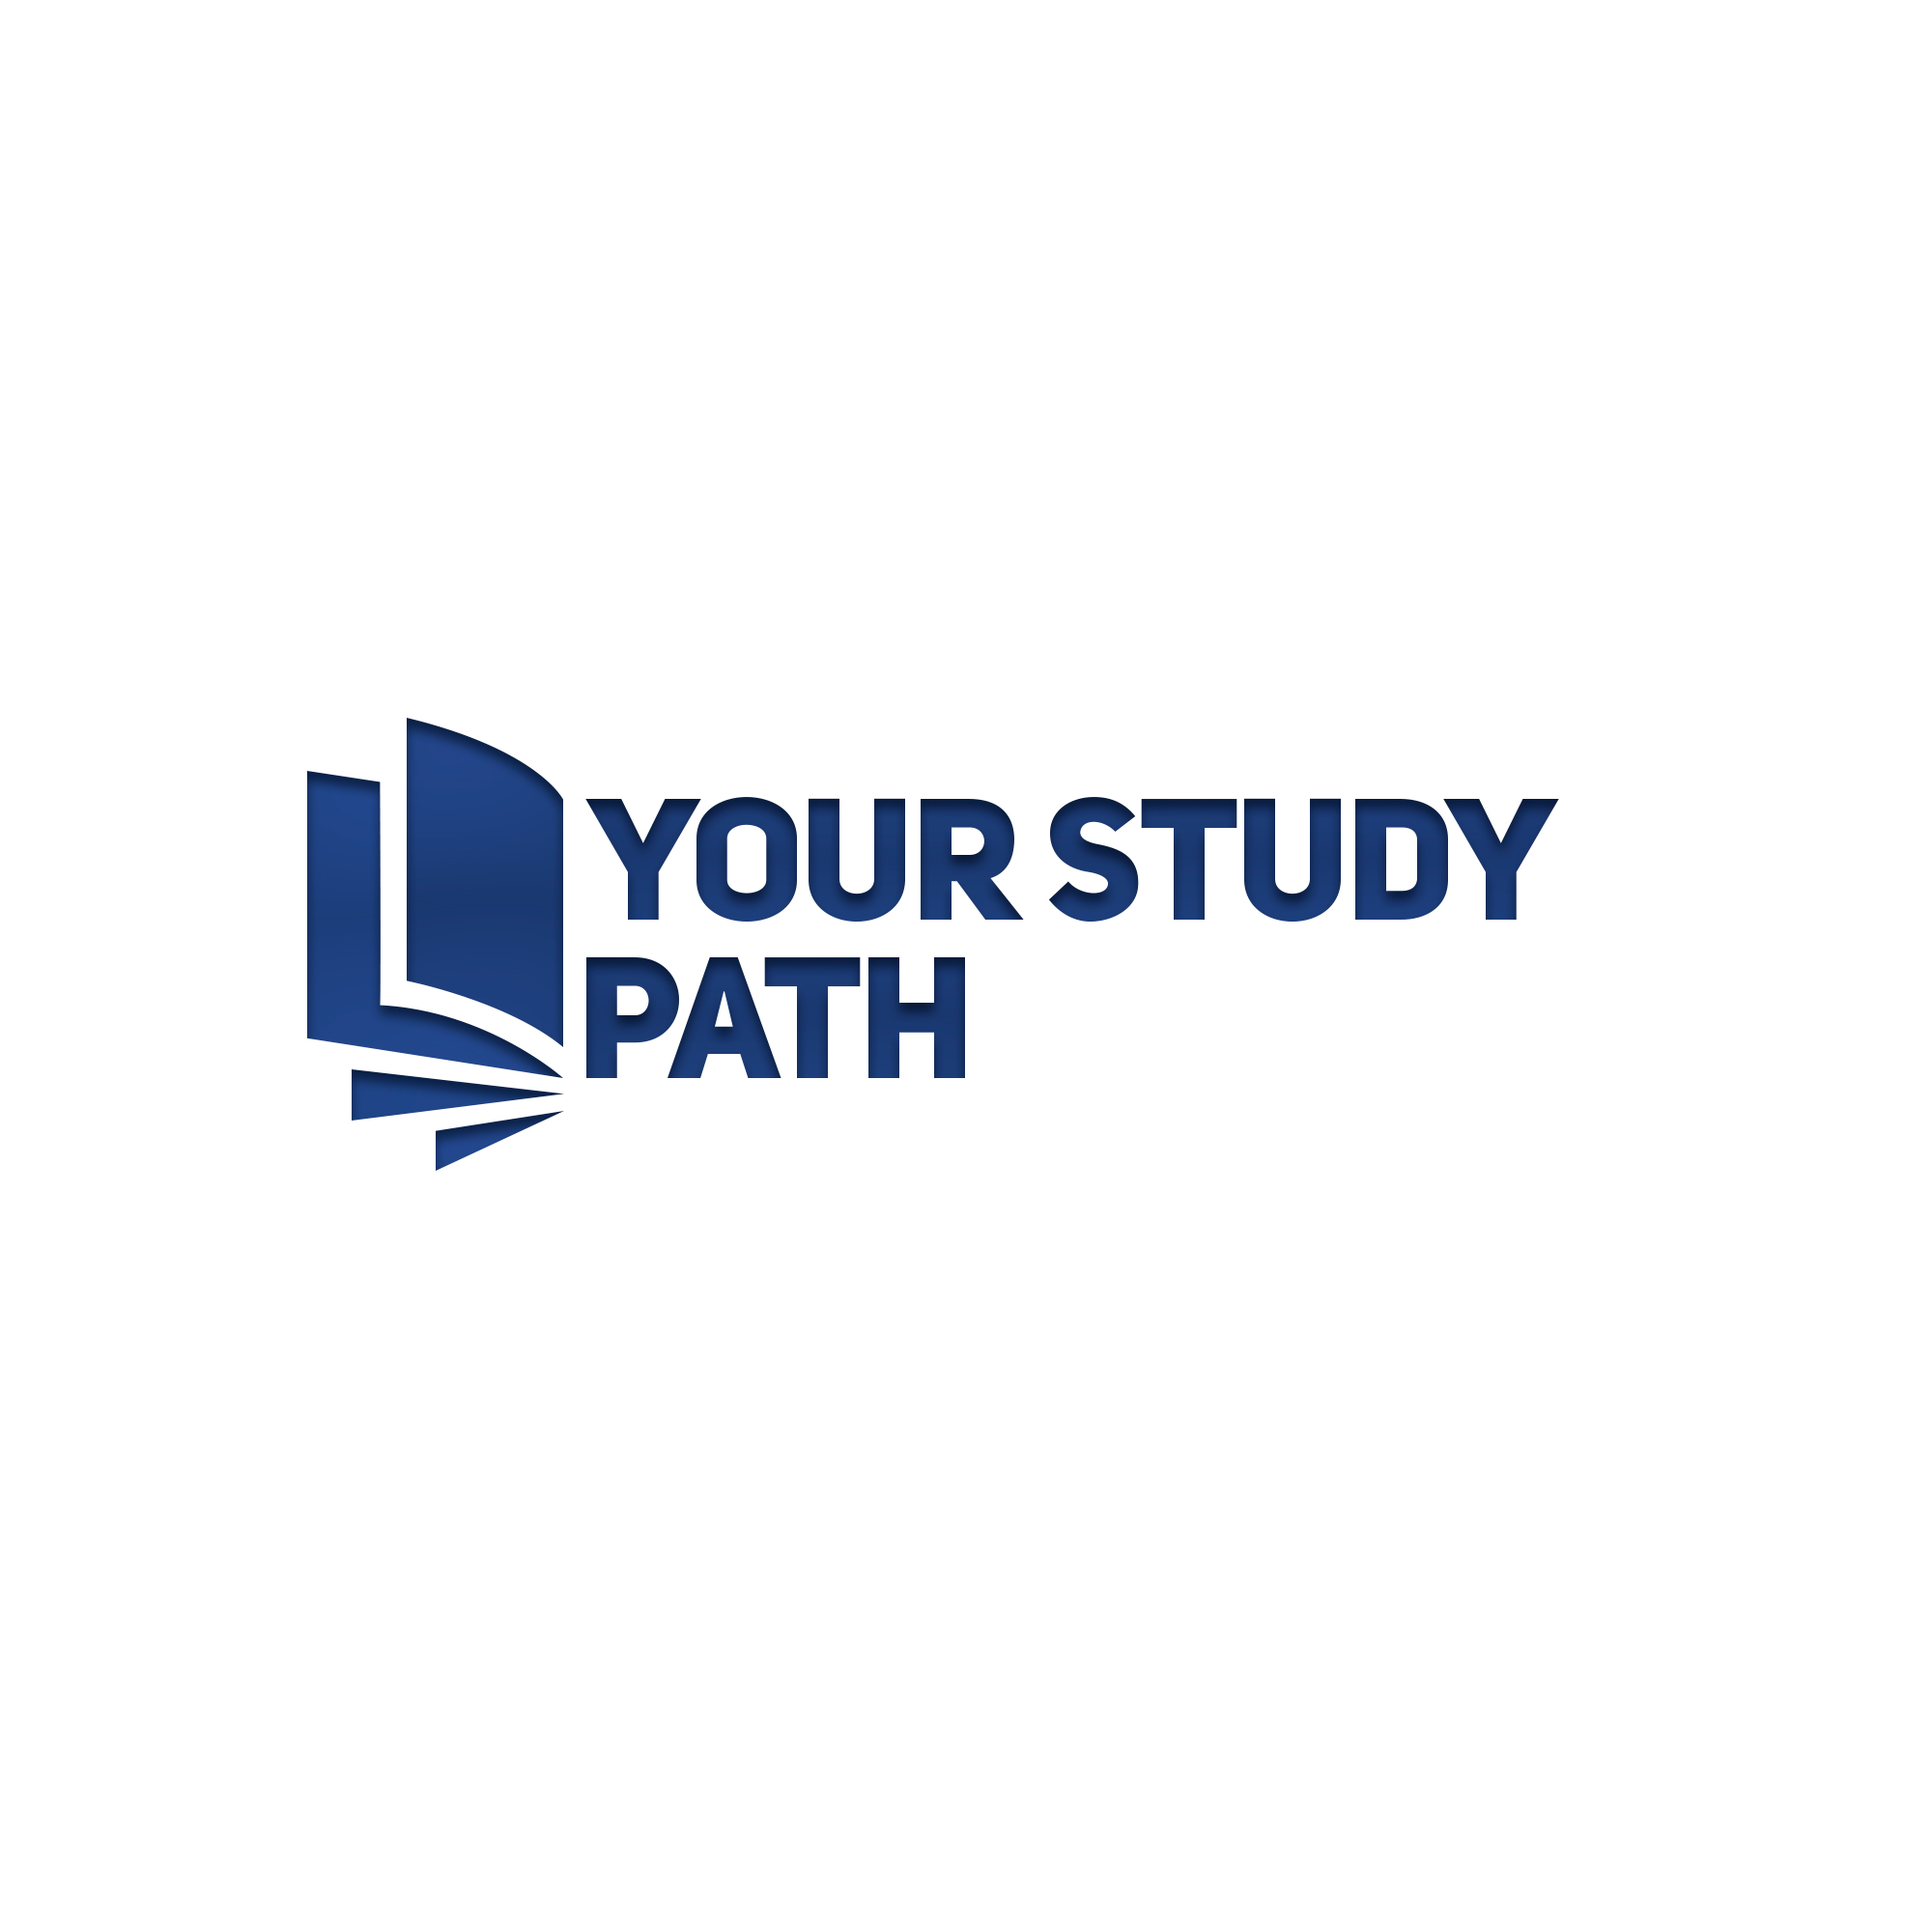 Your Study Path